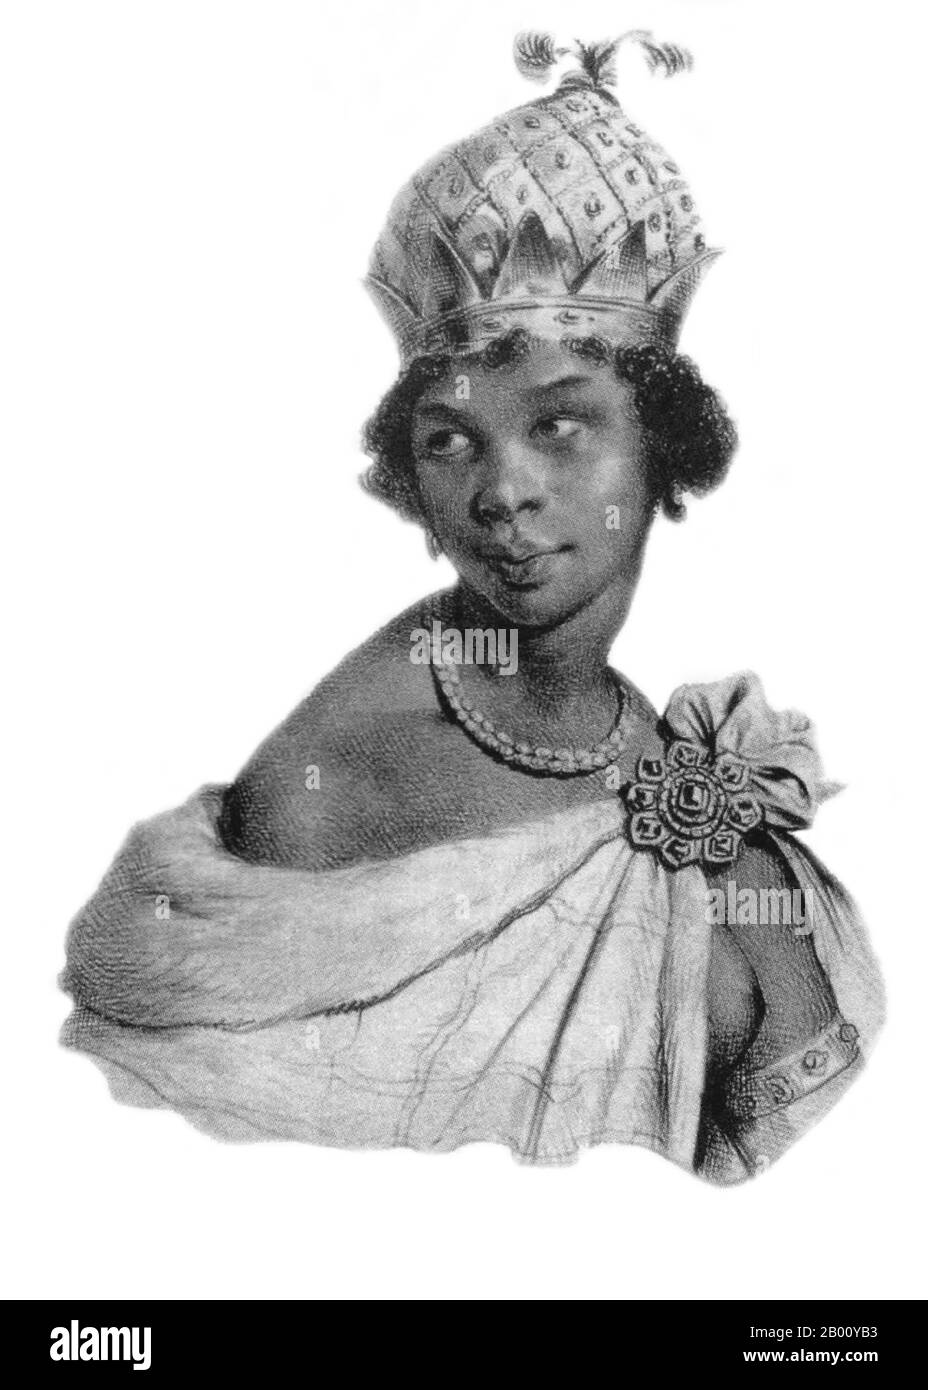 Angola: Nzinga Mbande (c. 1583 – December 17, 1663), Queen of the Ndongo and Matamba Kingdoms of the Mbundu people in southwest Africa. Lithograph by Francois Le Villain (fl. 1800-1830s), c. 1800.  Queen Njinga ruled in Matamba from 1631 until her death in 1663. During this time she integrated the country into her domains and thousands of her former subjects who had fled Portuguese attacks with her settled there. She waged several wars against Kasanje especially in 1634-1635. In 1639 she received a Portuguese peace mission which did not achieve a treaty, but did reestablish relations. Stock Photo